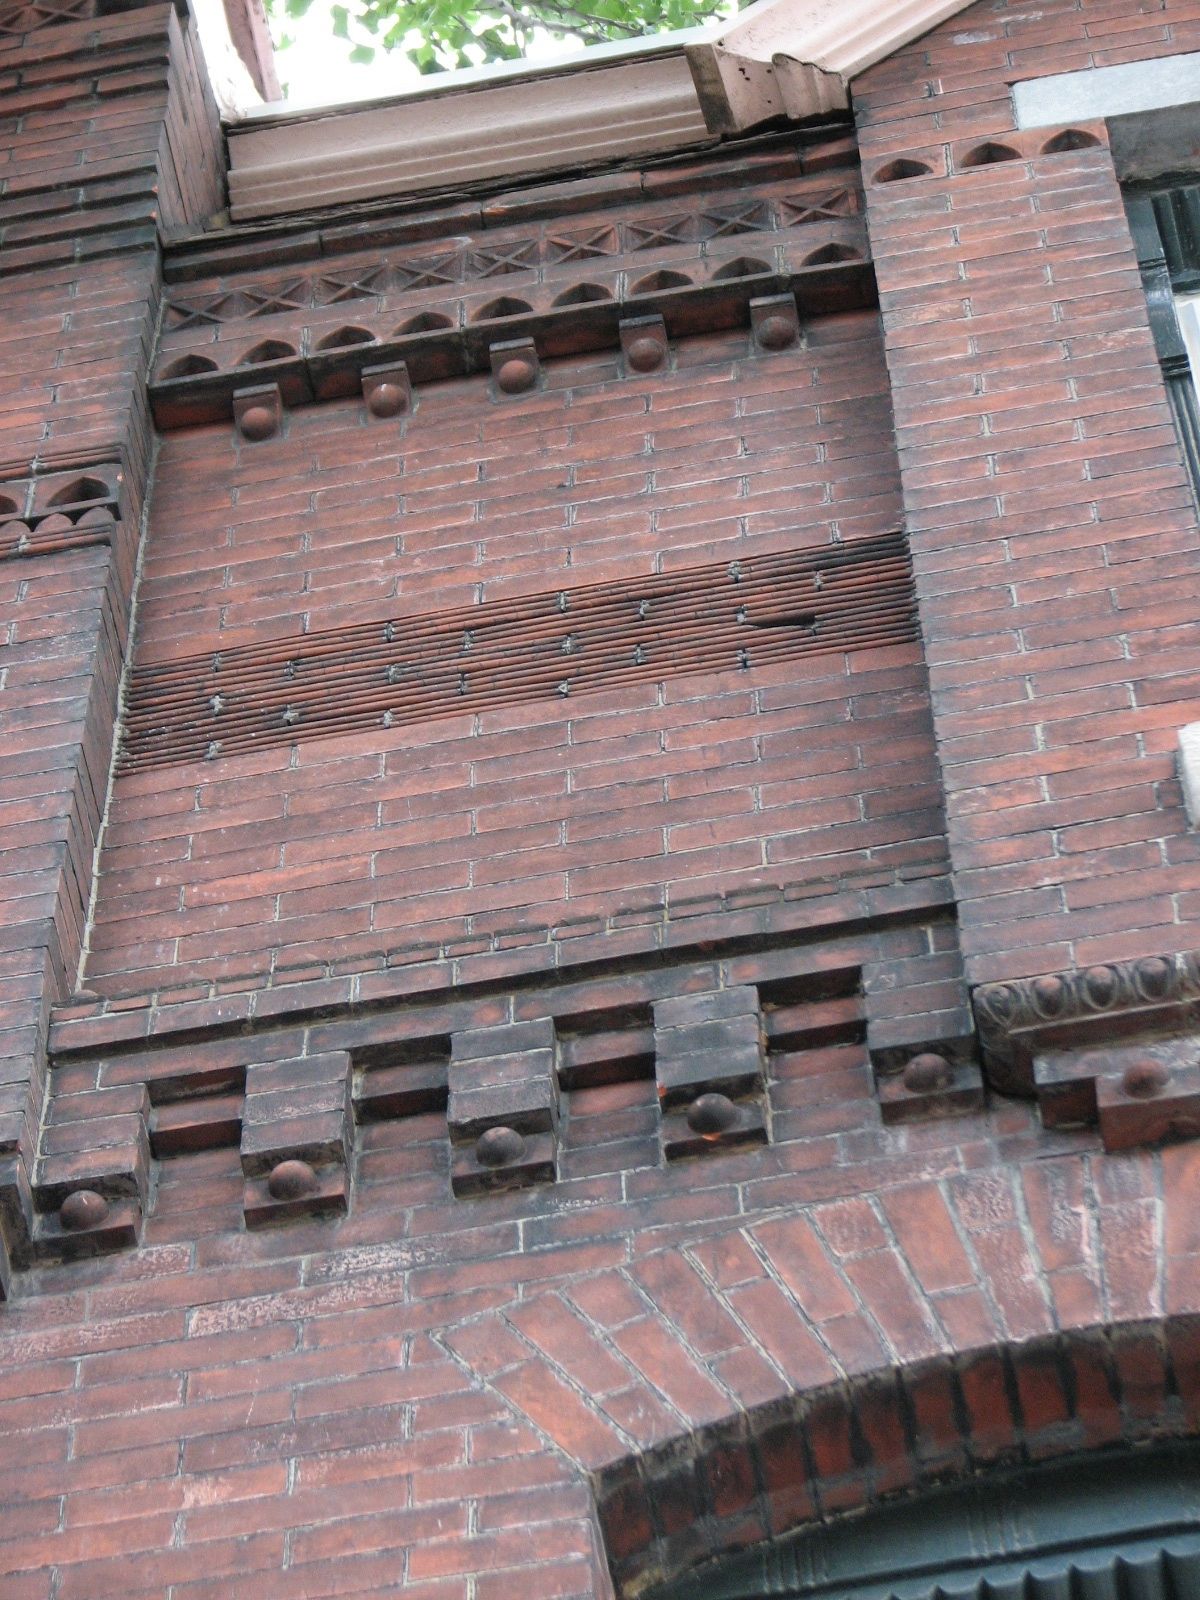 A variety of fine masonry work is found throughout the old Windsor Square.